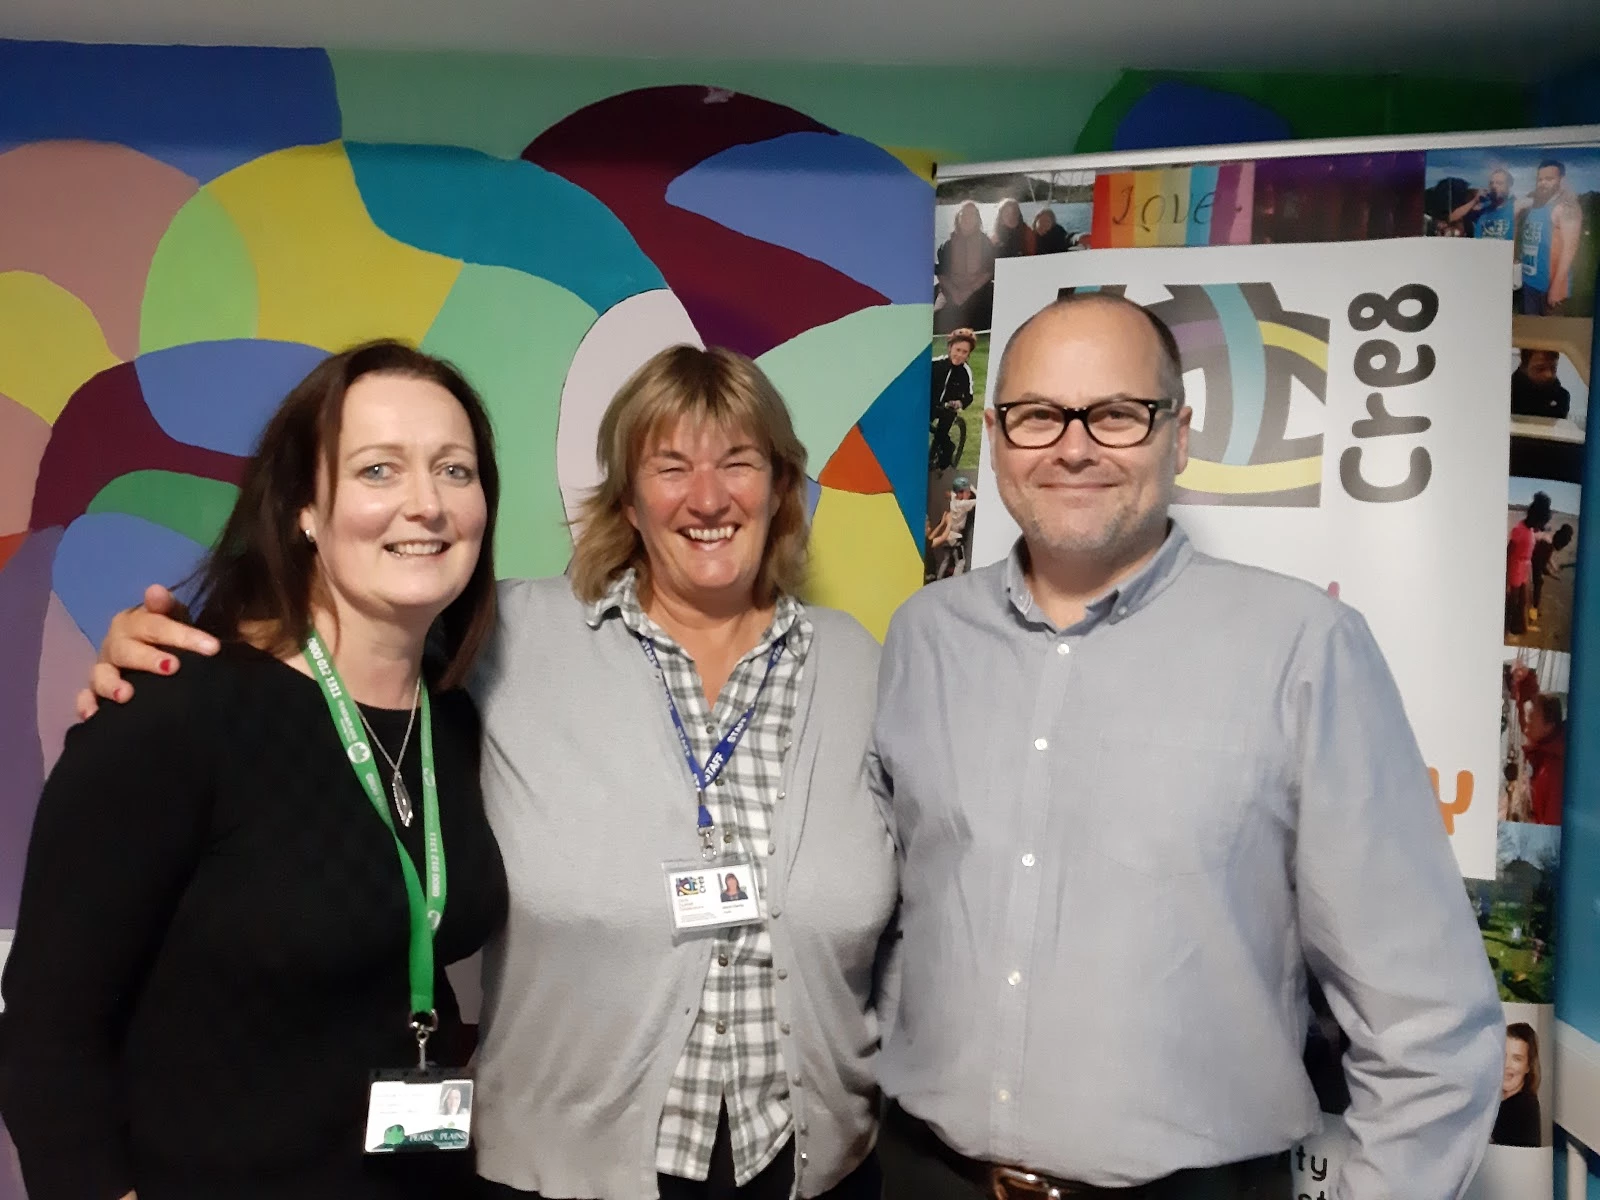 (L - R) Sharon Holloway Fire Safety Compliance Officer at PPHT, Jenni Hardy Chair of Cre8 and Mark Howden Interim CE at PPHT